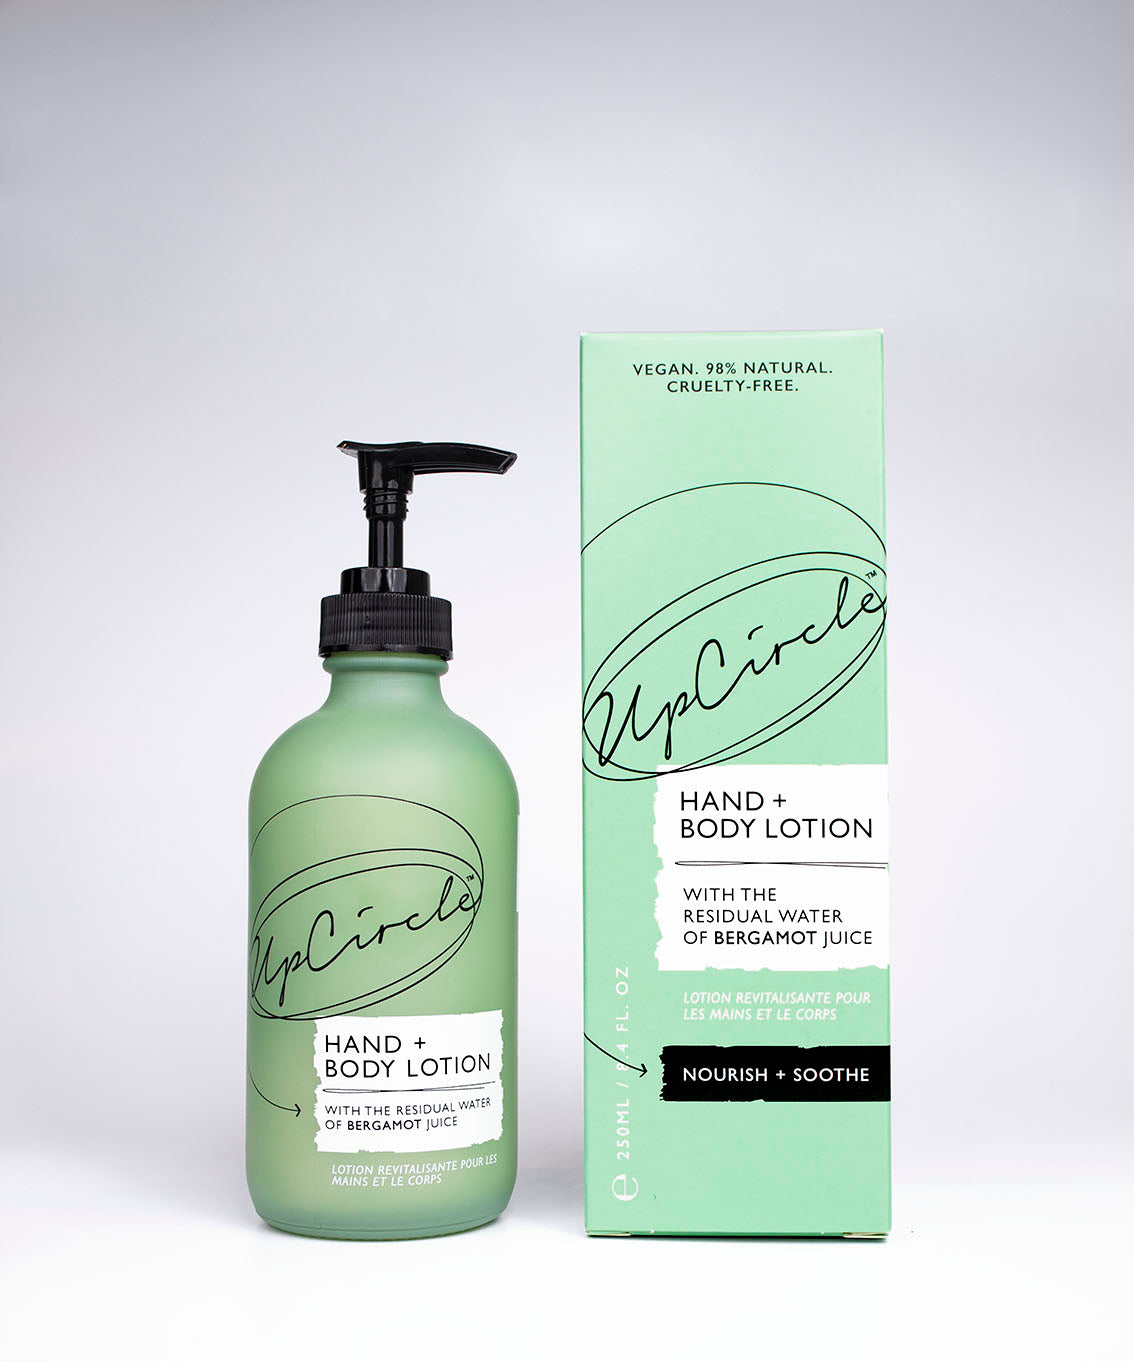 Hand & Body Lotion with bergamot water